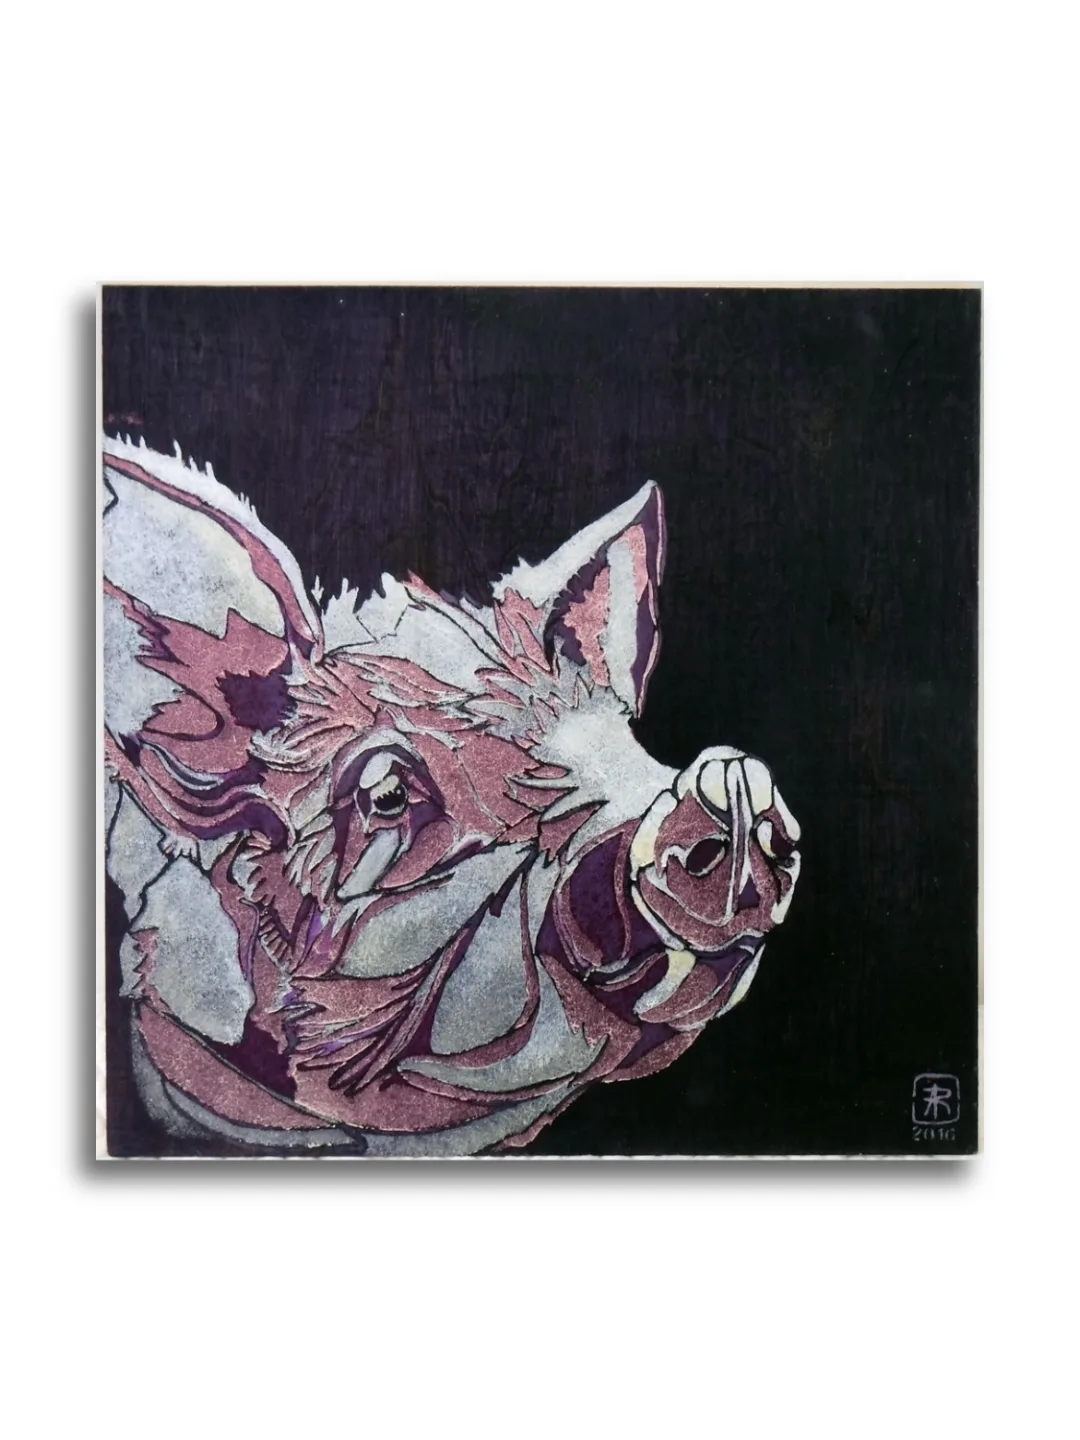 Pig #1 by Ann Richmond - A stunning, Original stencilled artwork featuring a Pig's head. Painted in the artist's unique style... Framing available.